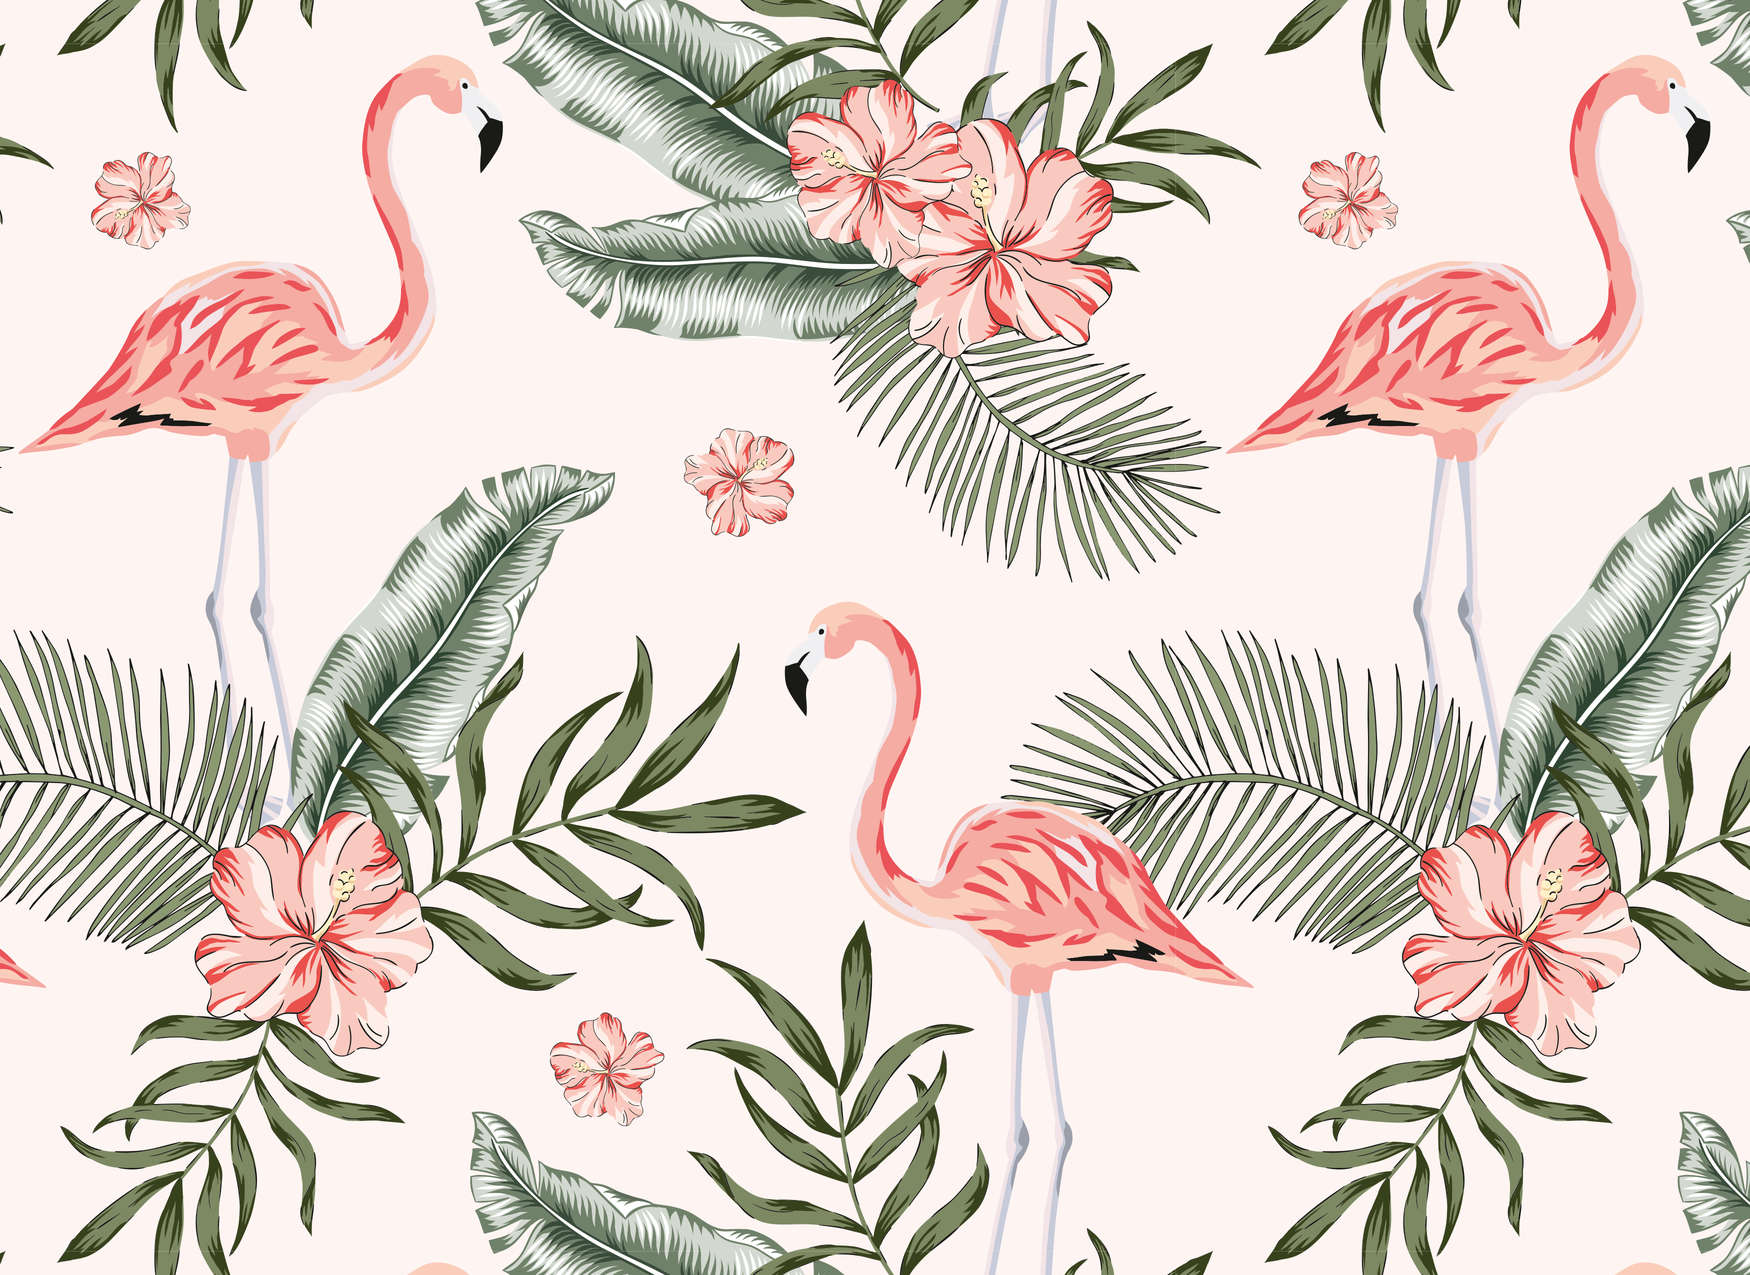             Flamingos and tropical plants - white, pink, green
        